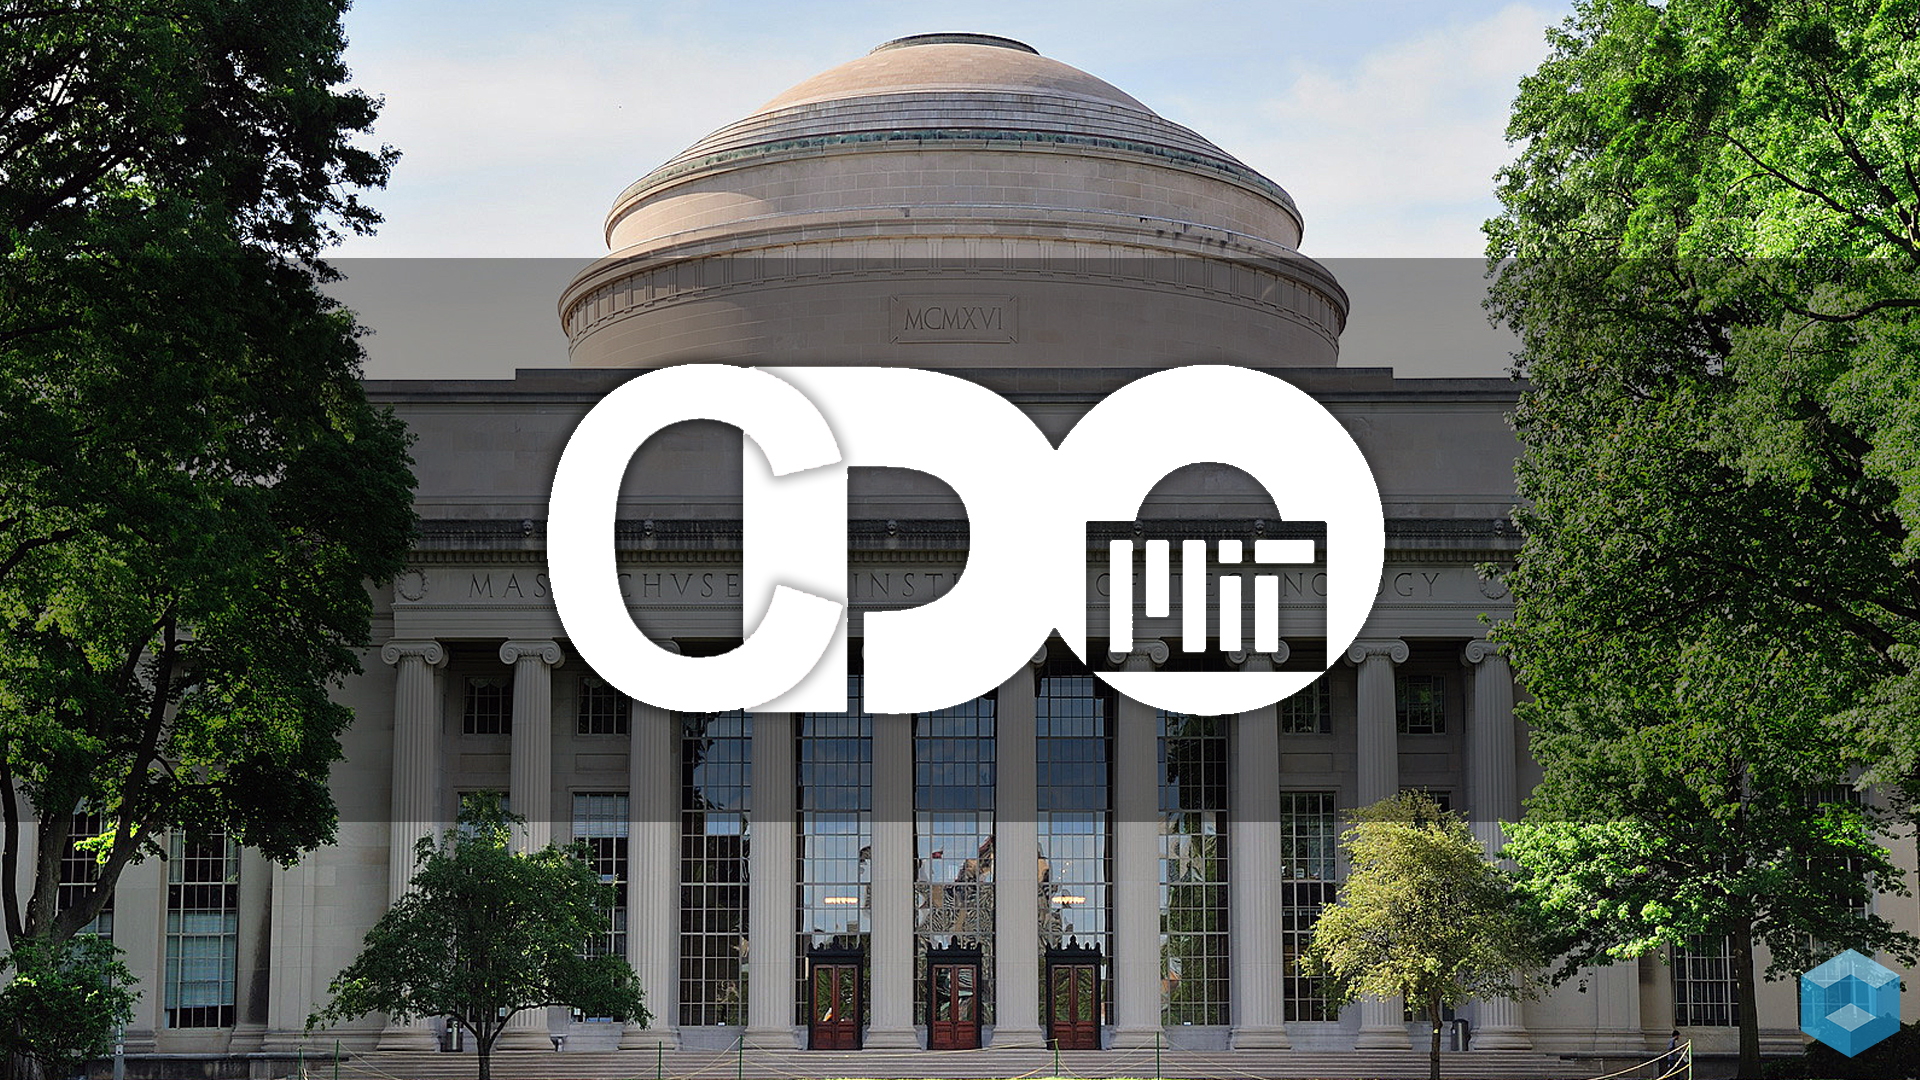 Charting the rocky road of the chief data officer at the MIT CDOIQ